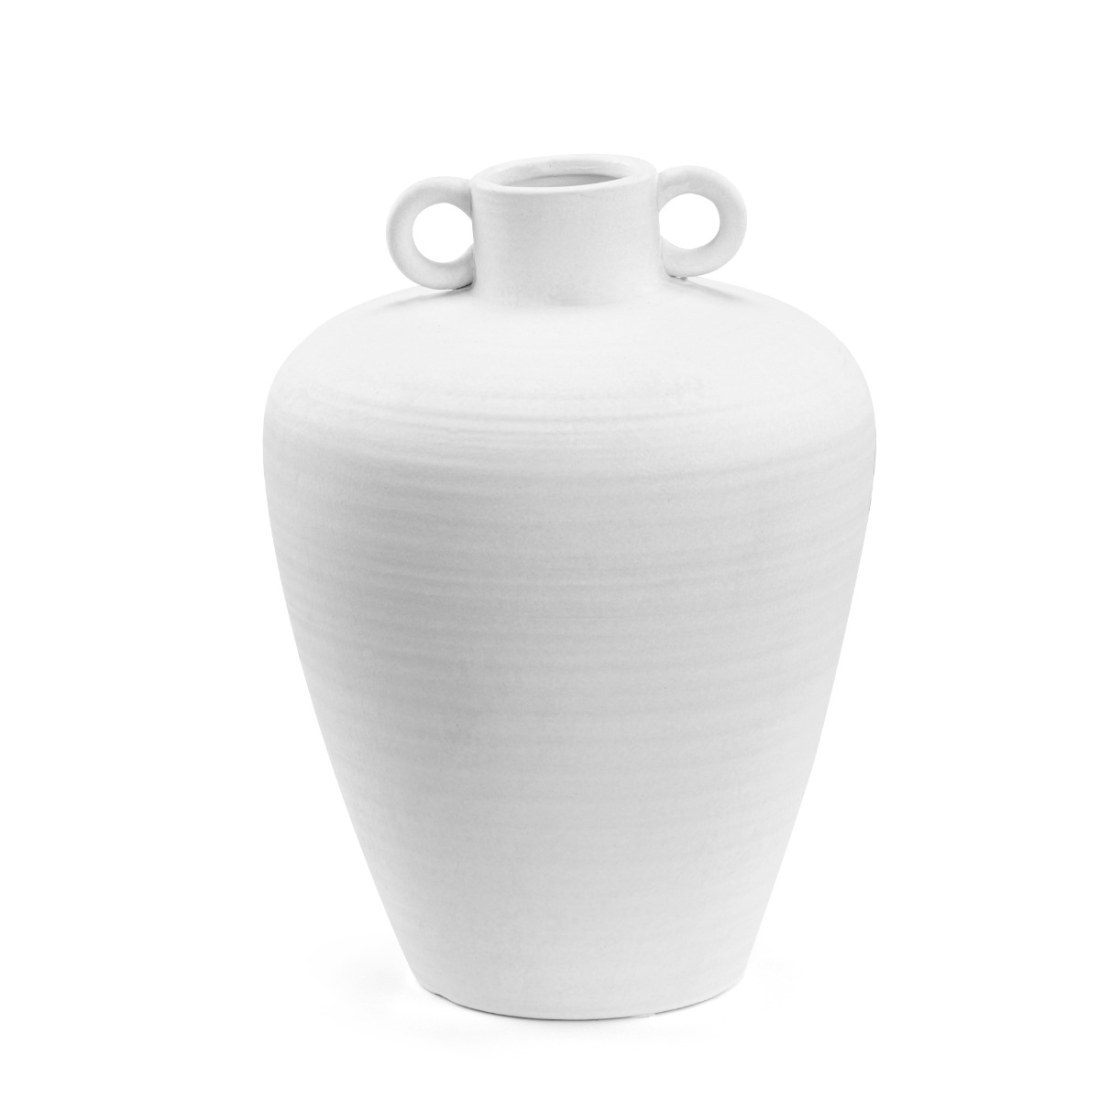 Meadow Decorative Tall White Nordic Ceramic Vessel Vase With Handles